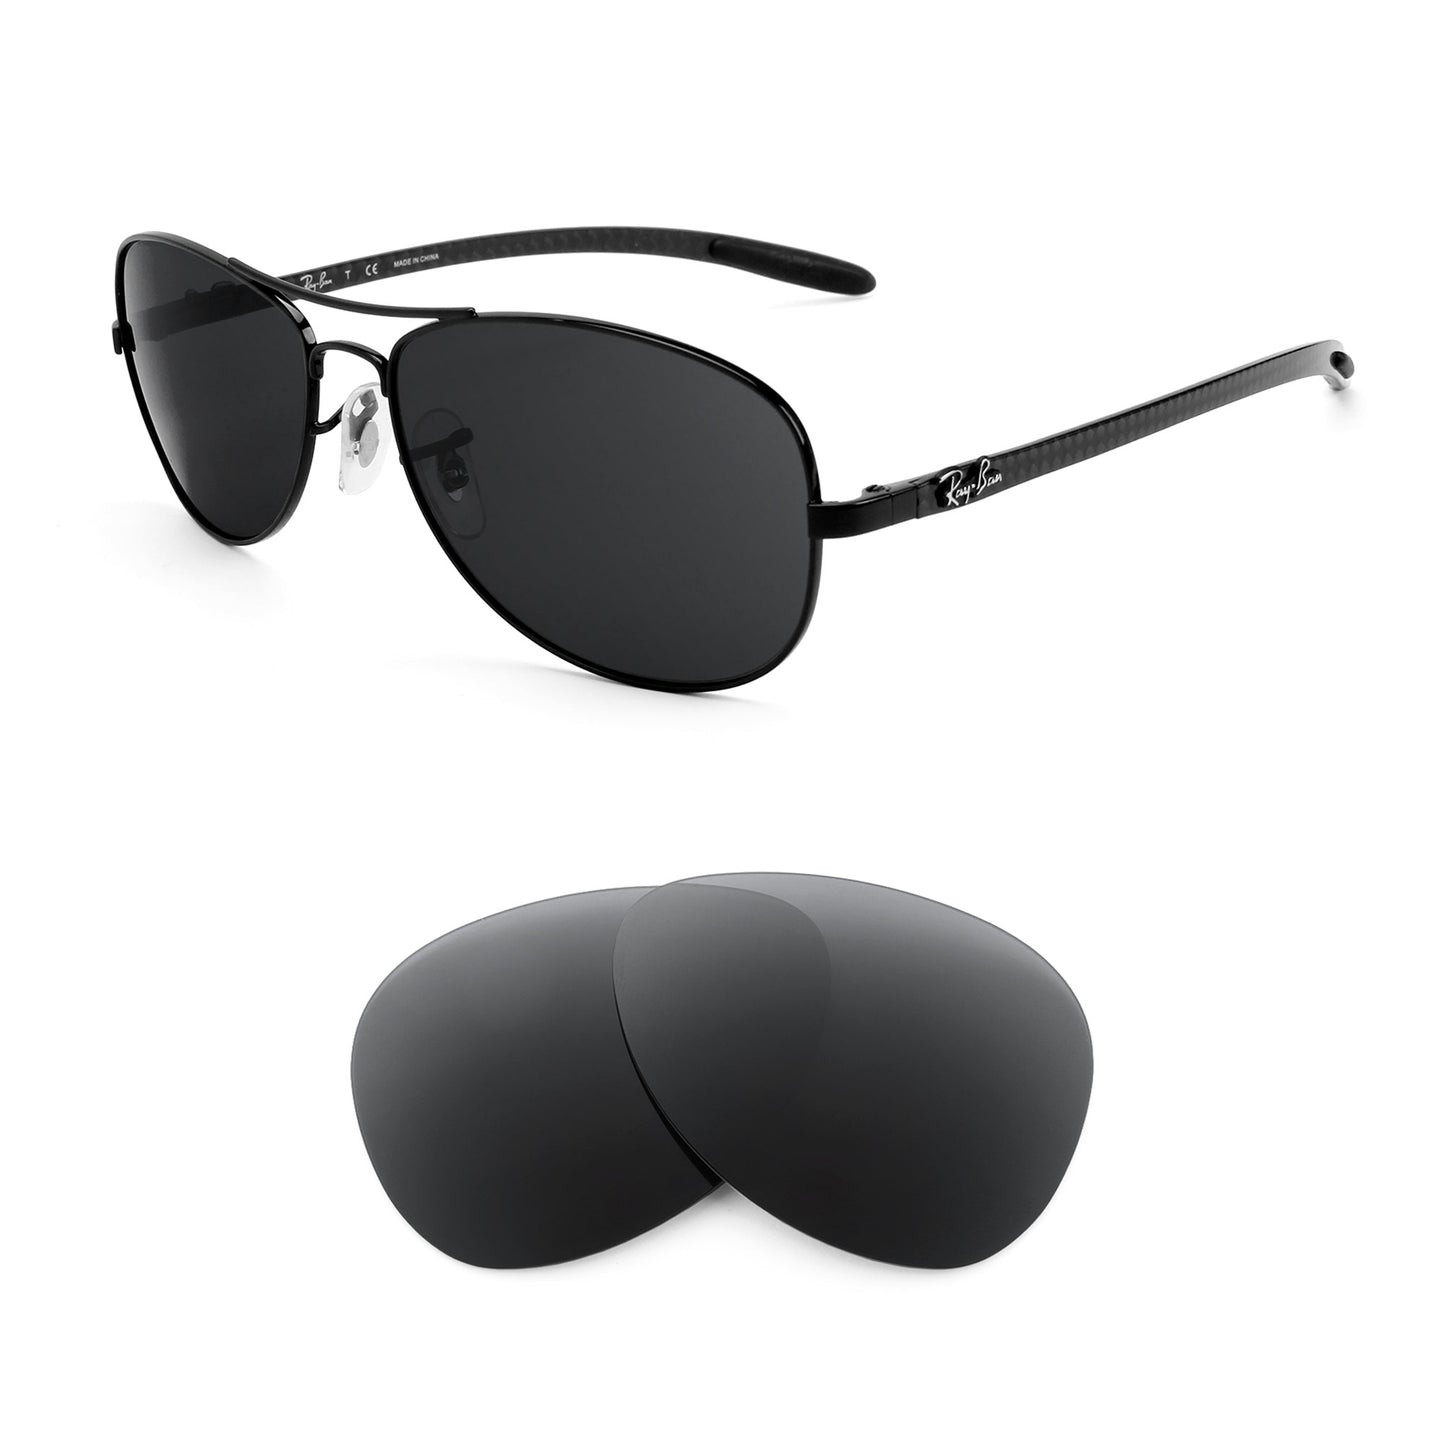 Ray-Ban RB8301 56mm sunglasses with replacement lenses